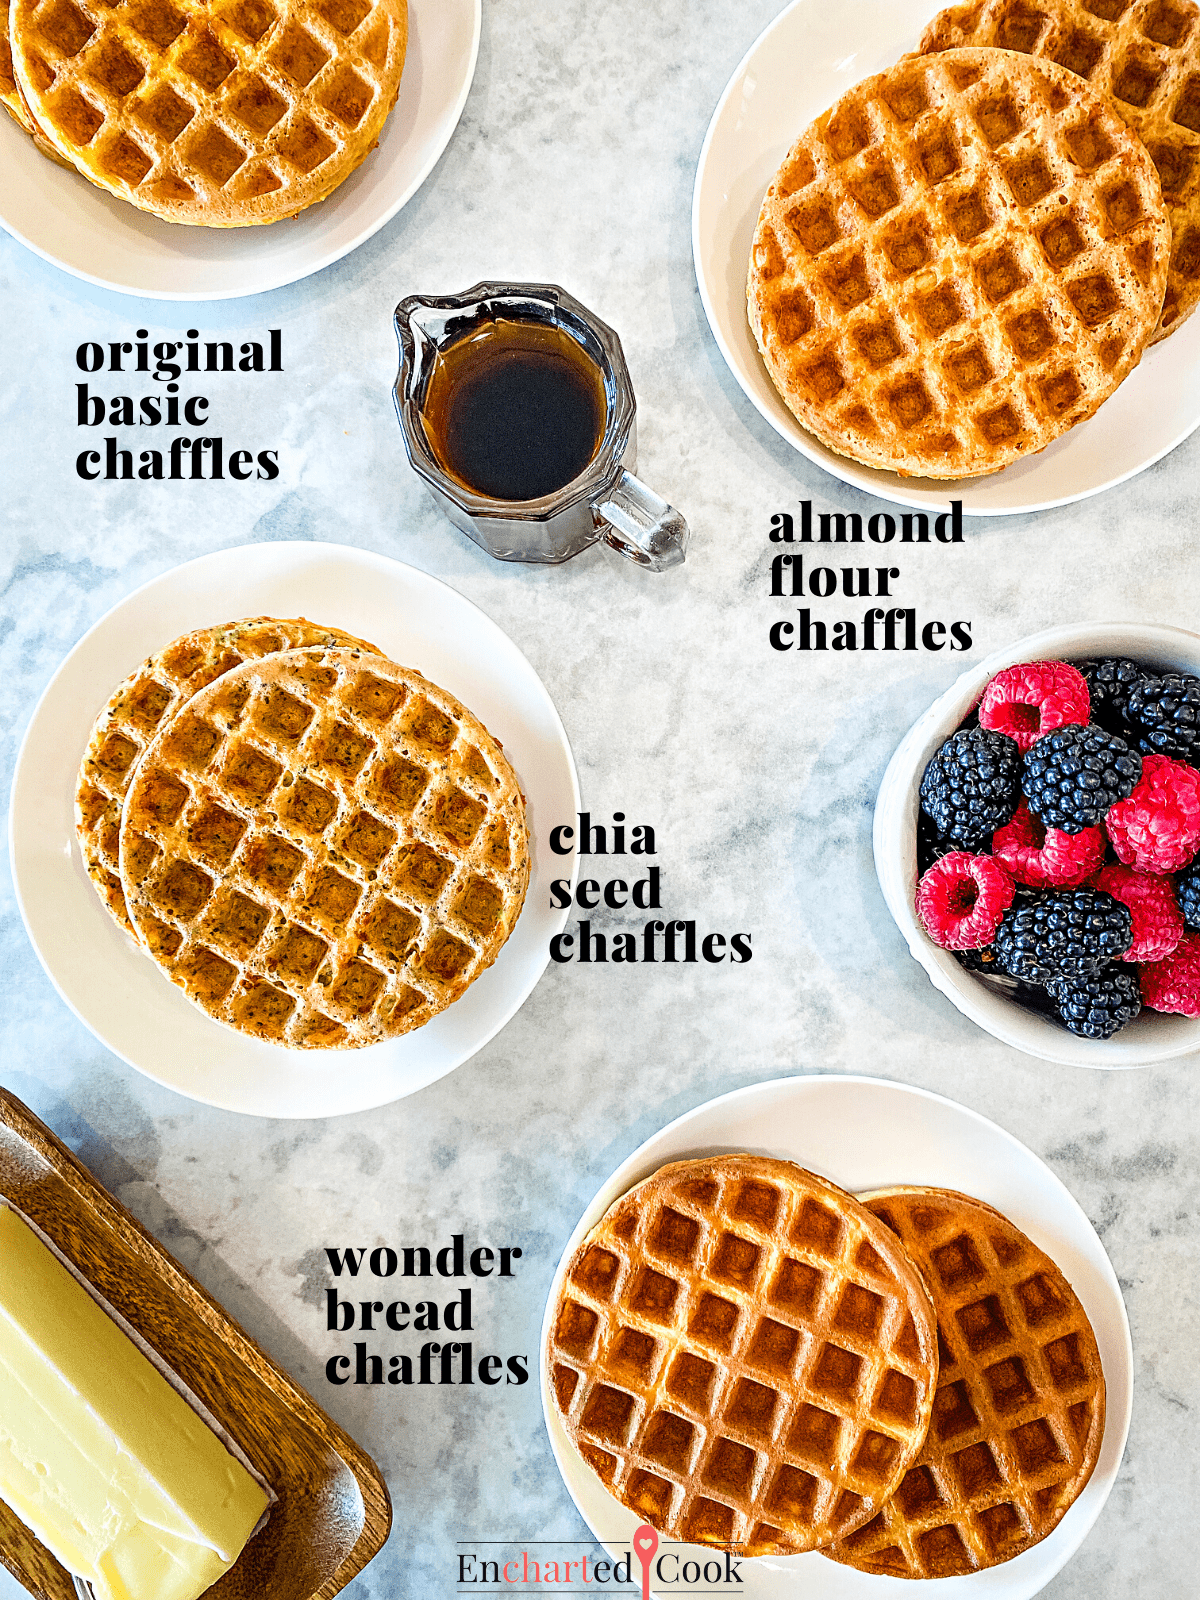 4 Kinds of Chaffles on white plates with text overlay.